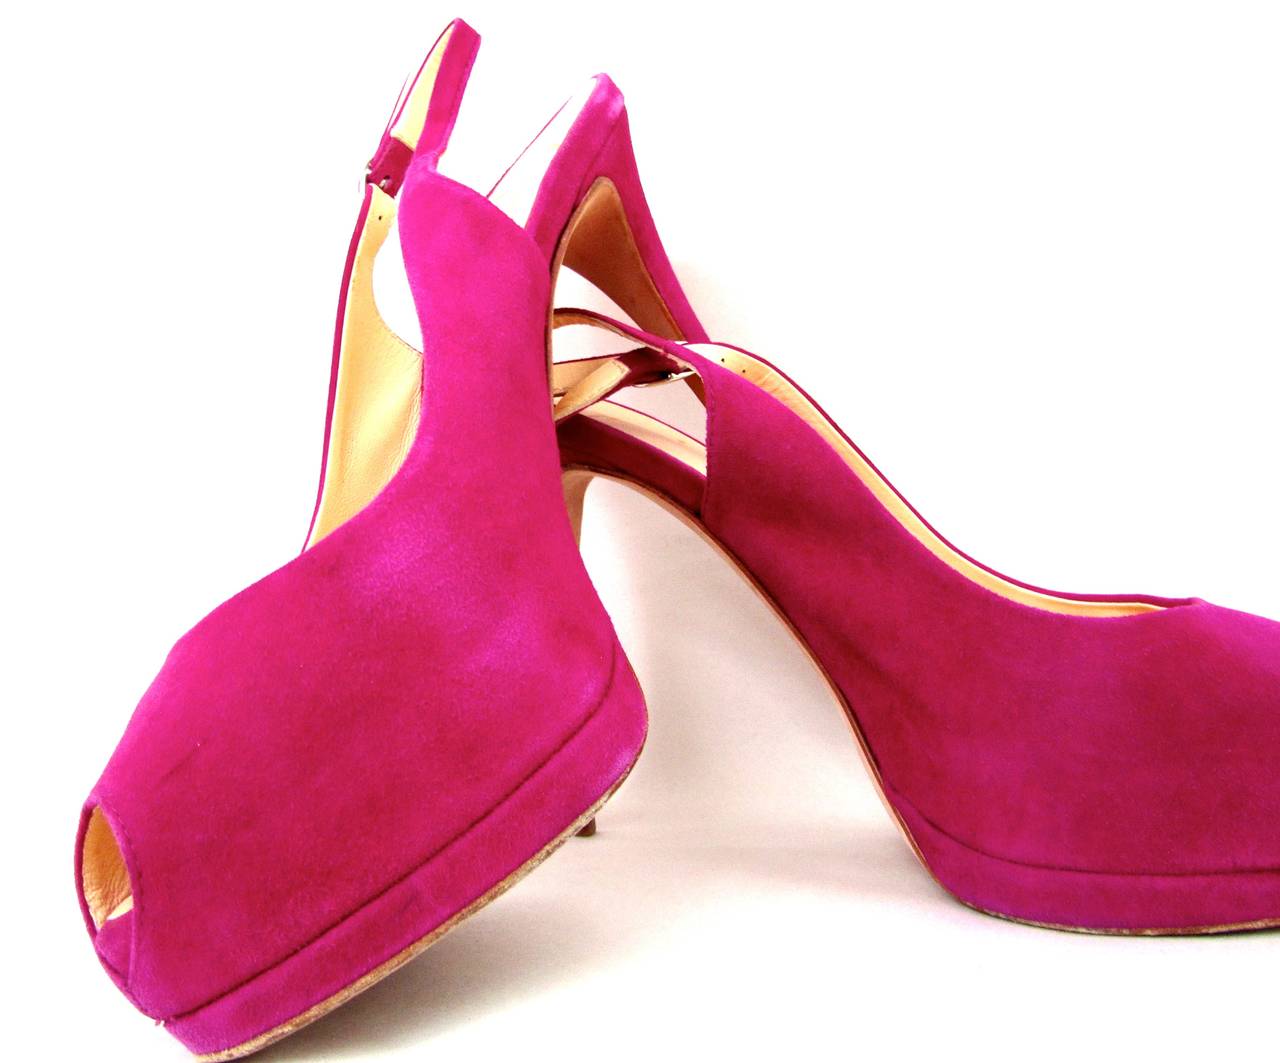 Women's Giuseppe Zanotti Pink Fuchsia Suede Pumps with Heel Strap - Size 37 For Sale